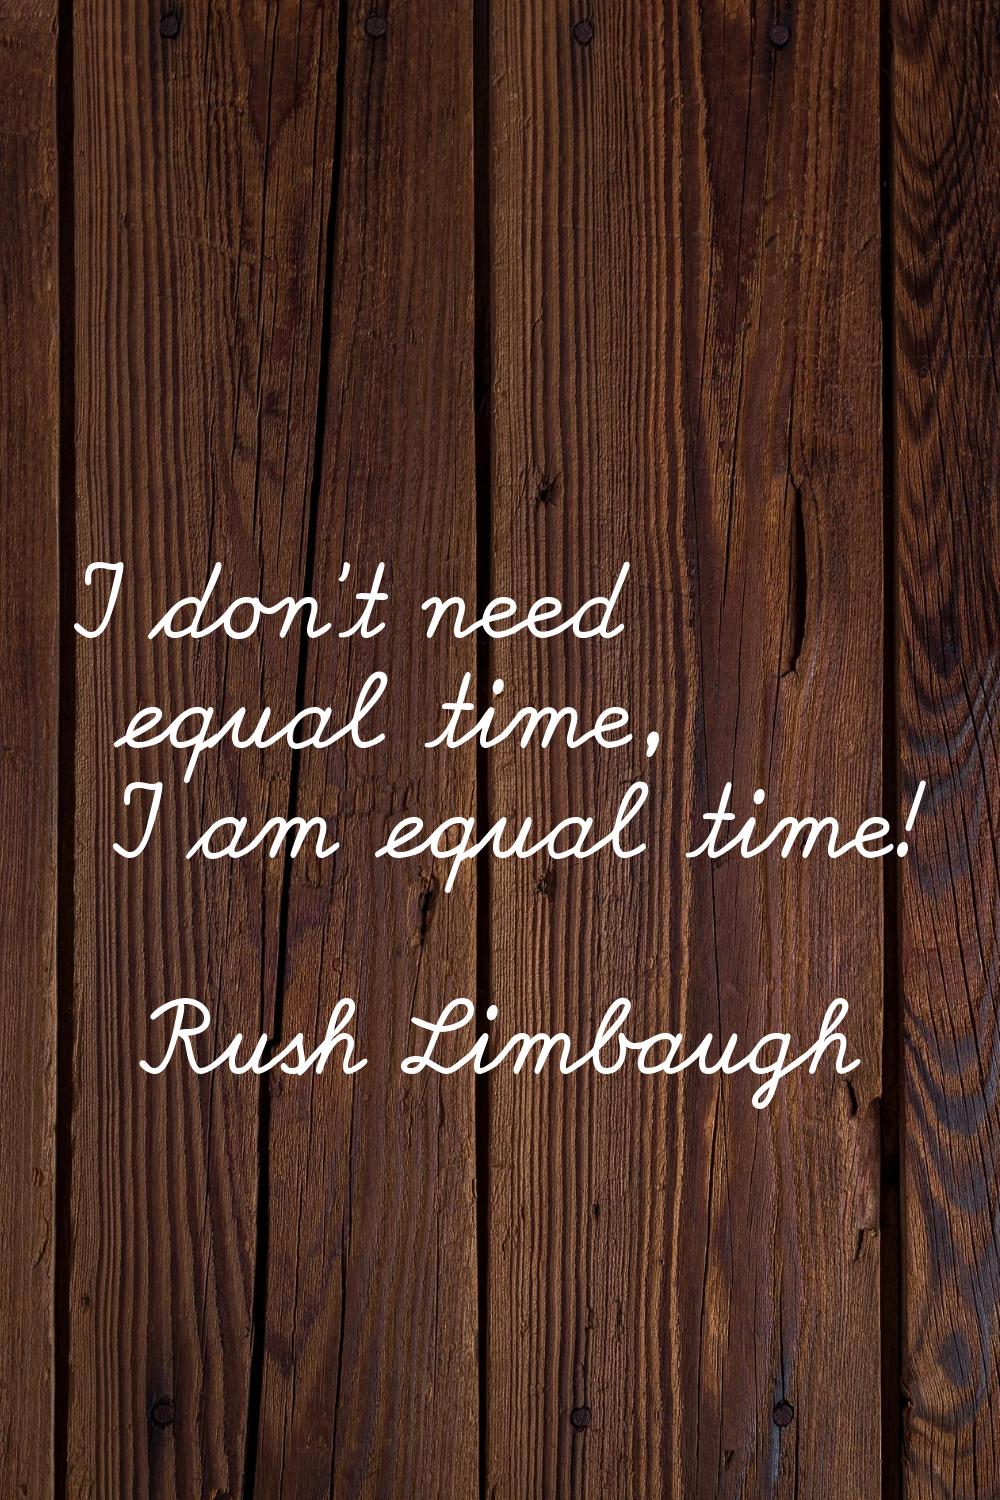 I don't need equal time, I am equal time!